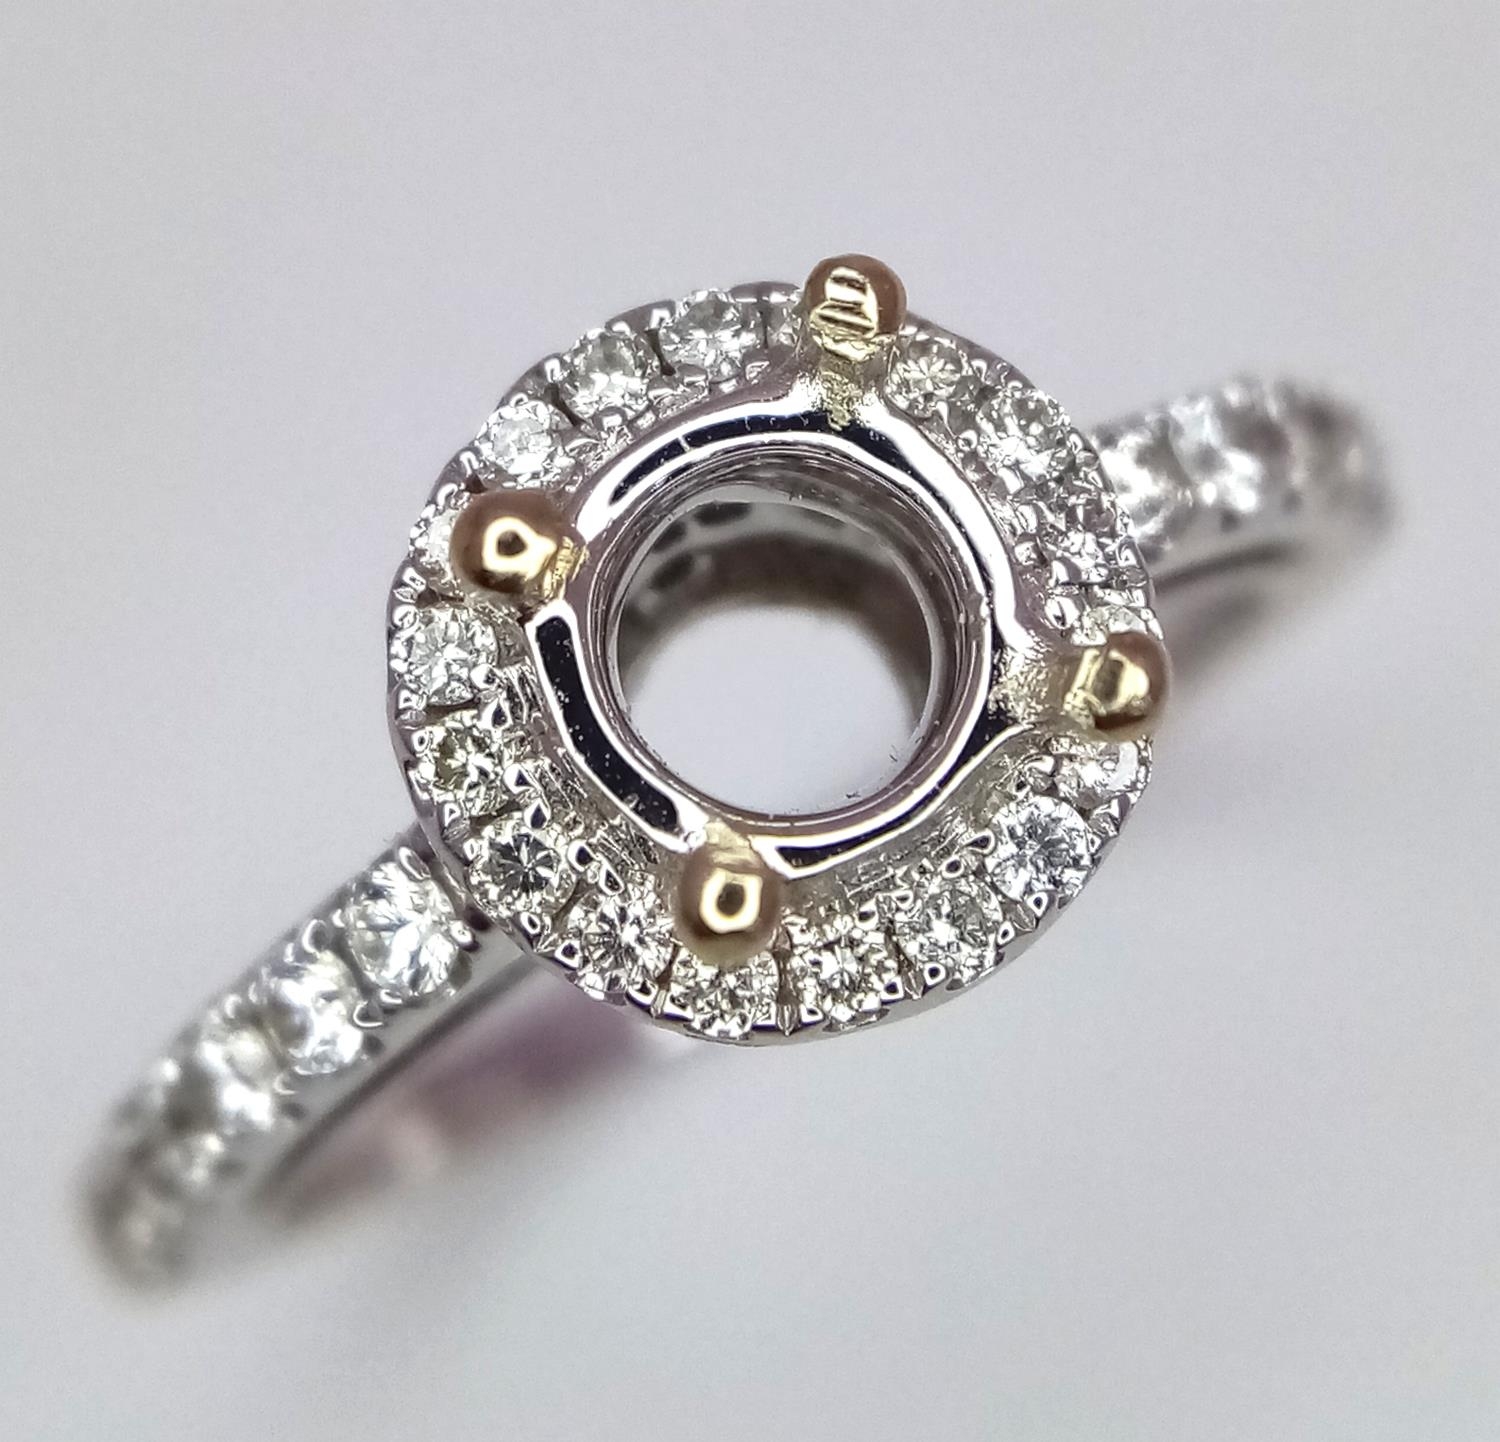 AN 18K WHITE GOLD DIAMOND HALO SOLITAIRE RING MOUNT WITH DIAMOND SET SHOULDERS. Ready to set your - Image 4 of 8